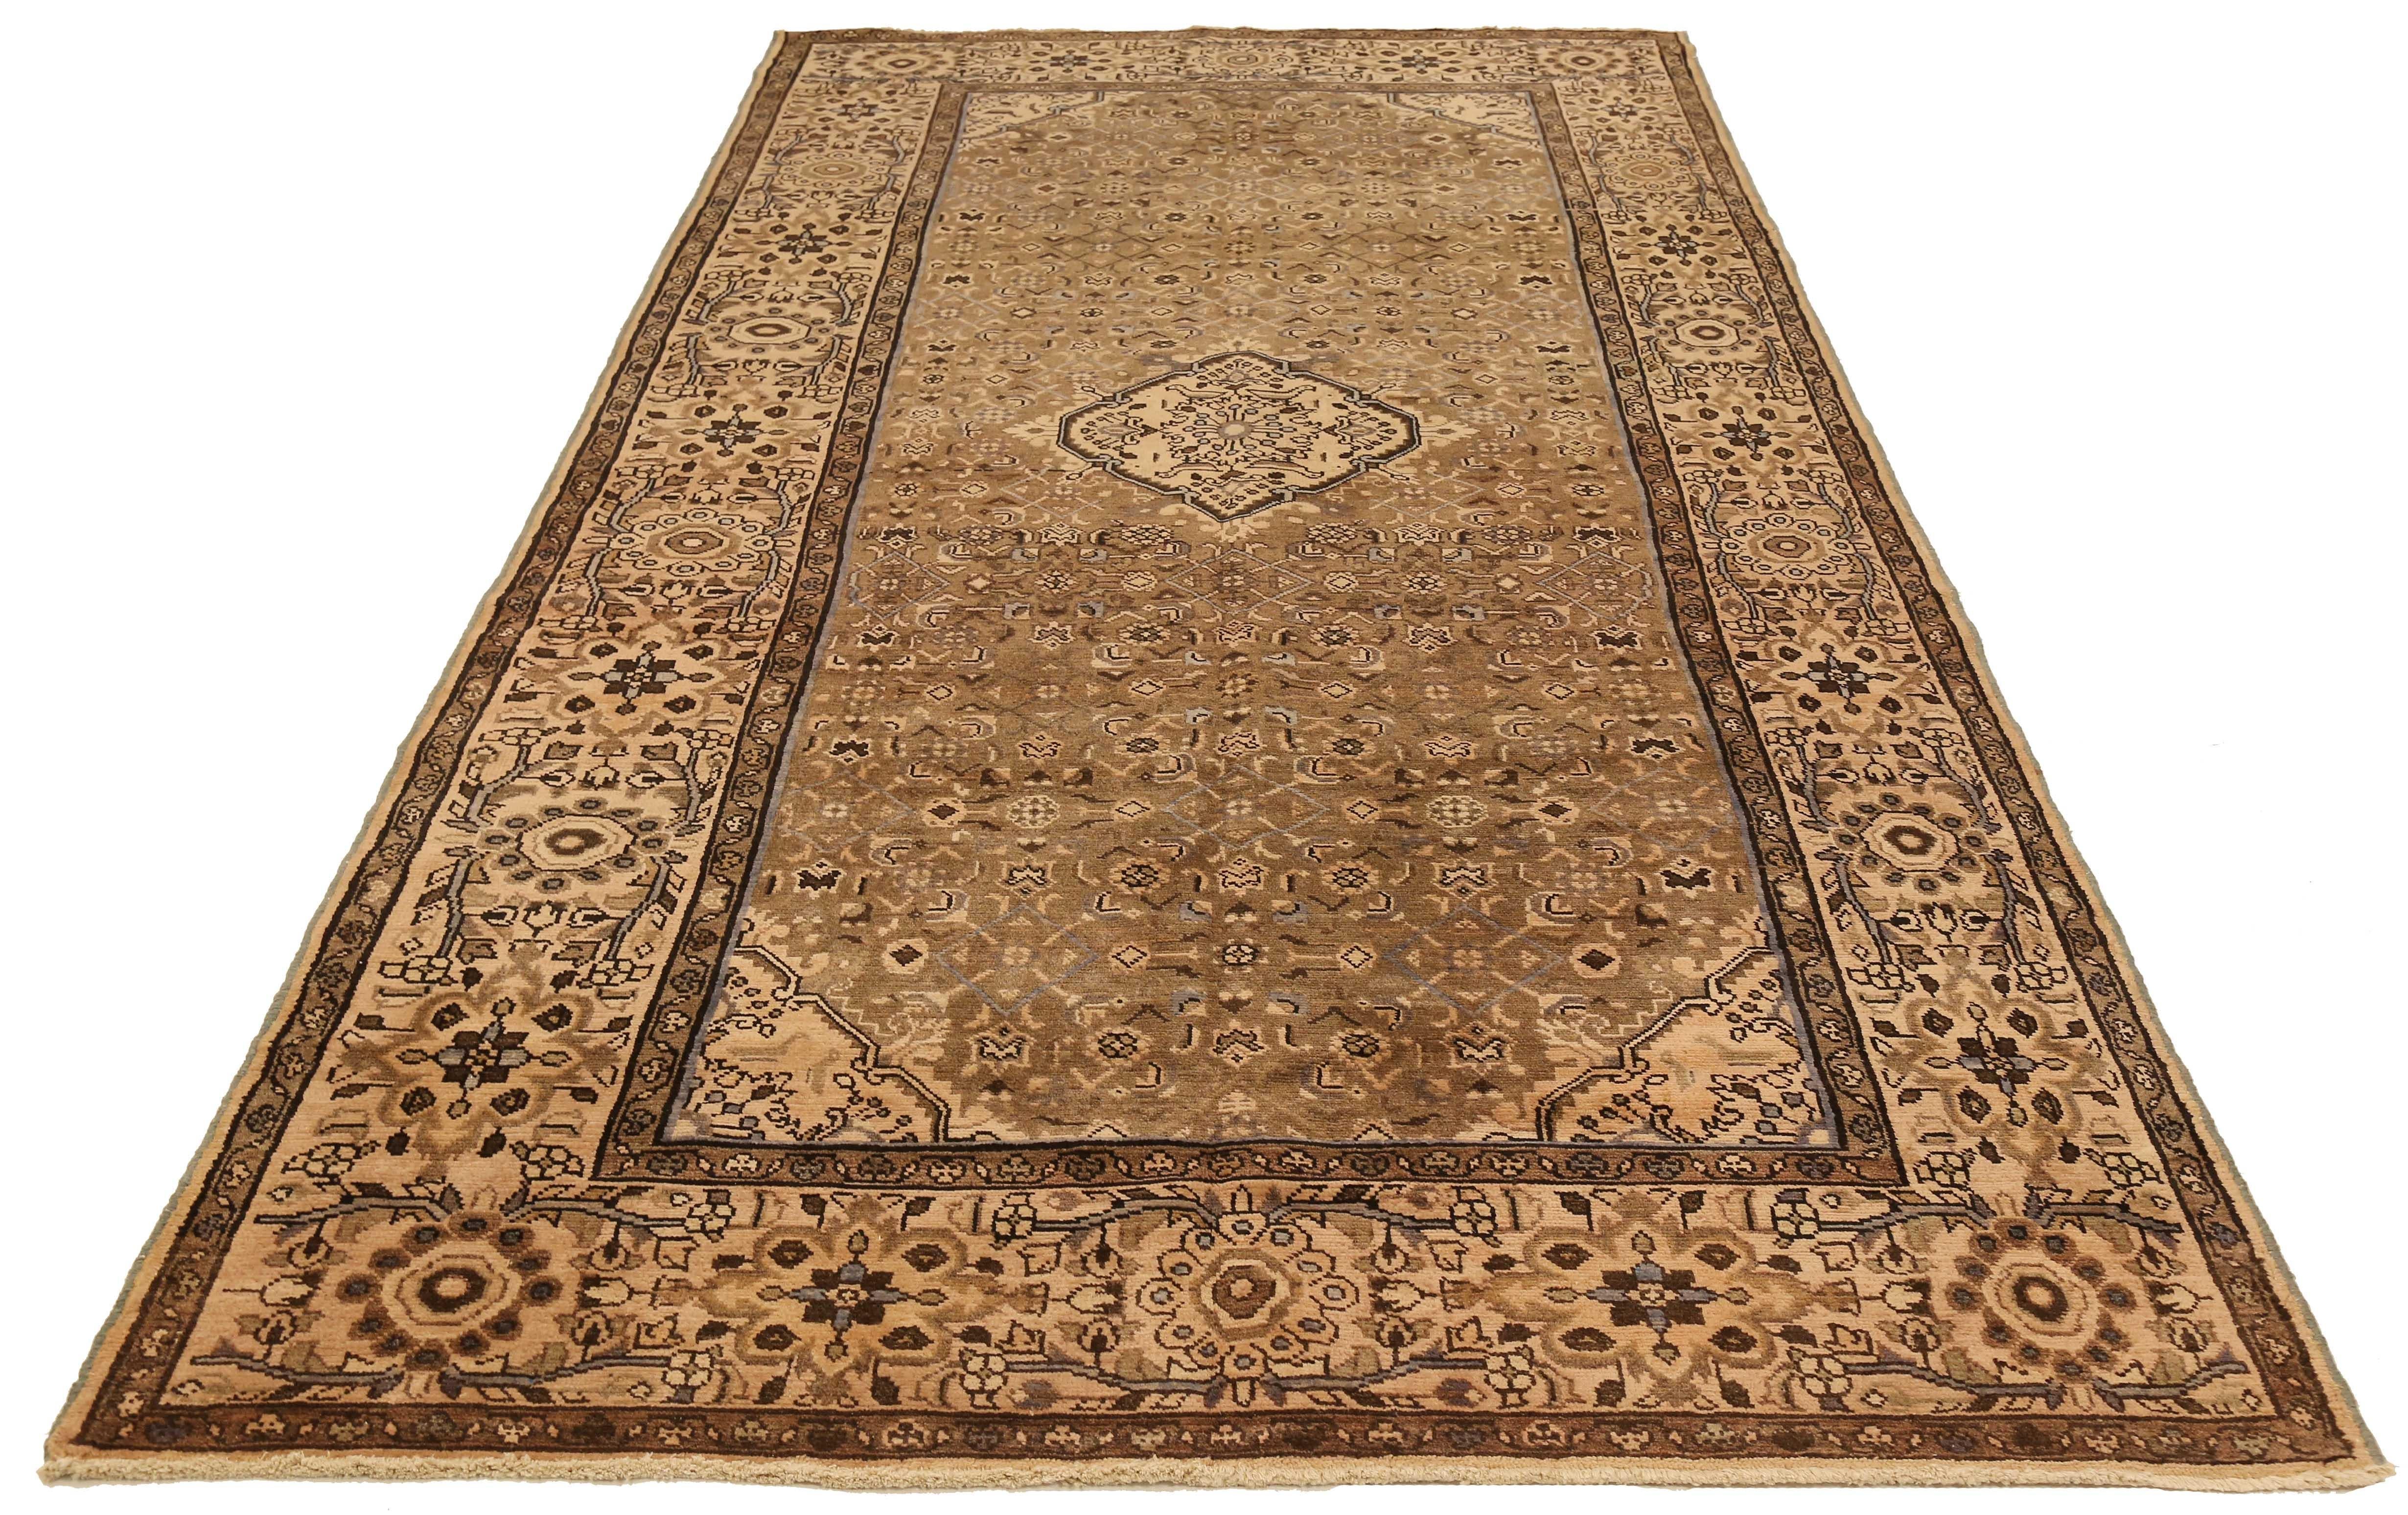 Antique Persian runner rug handwoven from the finest sheep’s wool and colored with all-natural vegetable dyes that are safe for humans and pets. It’s a traditional Malayer design featuring gray and brown botanical details over an ivory-beige field.